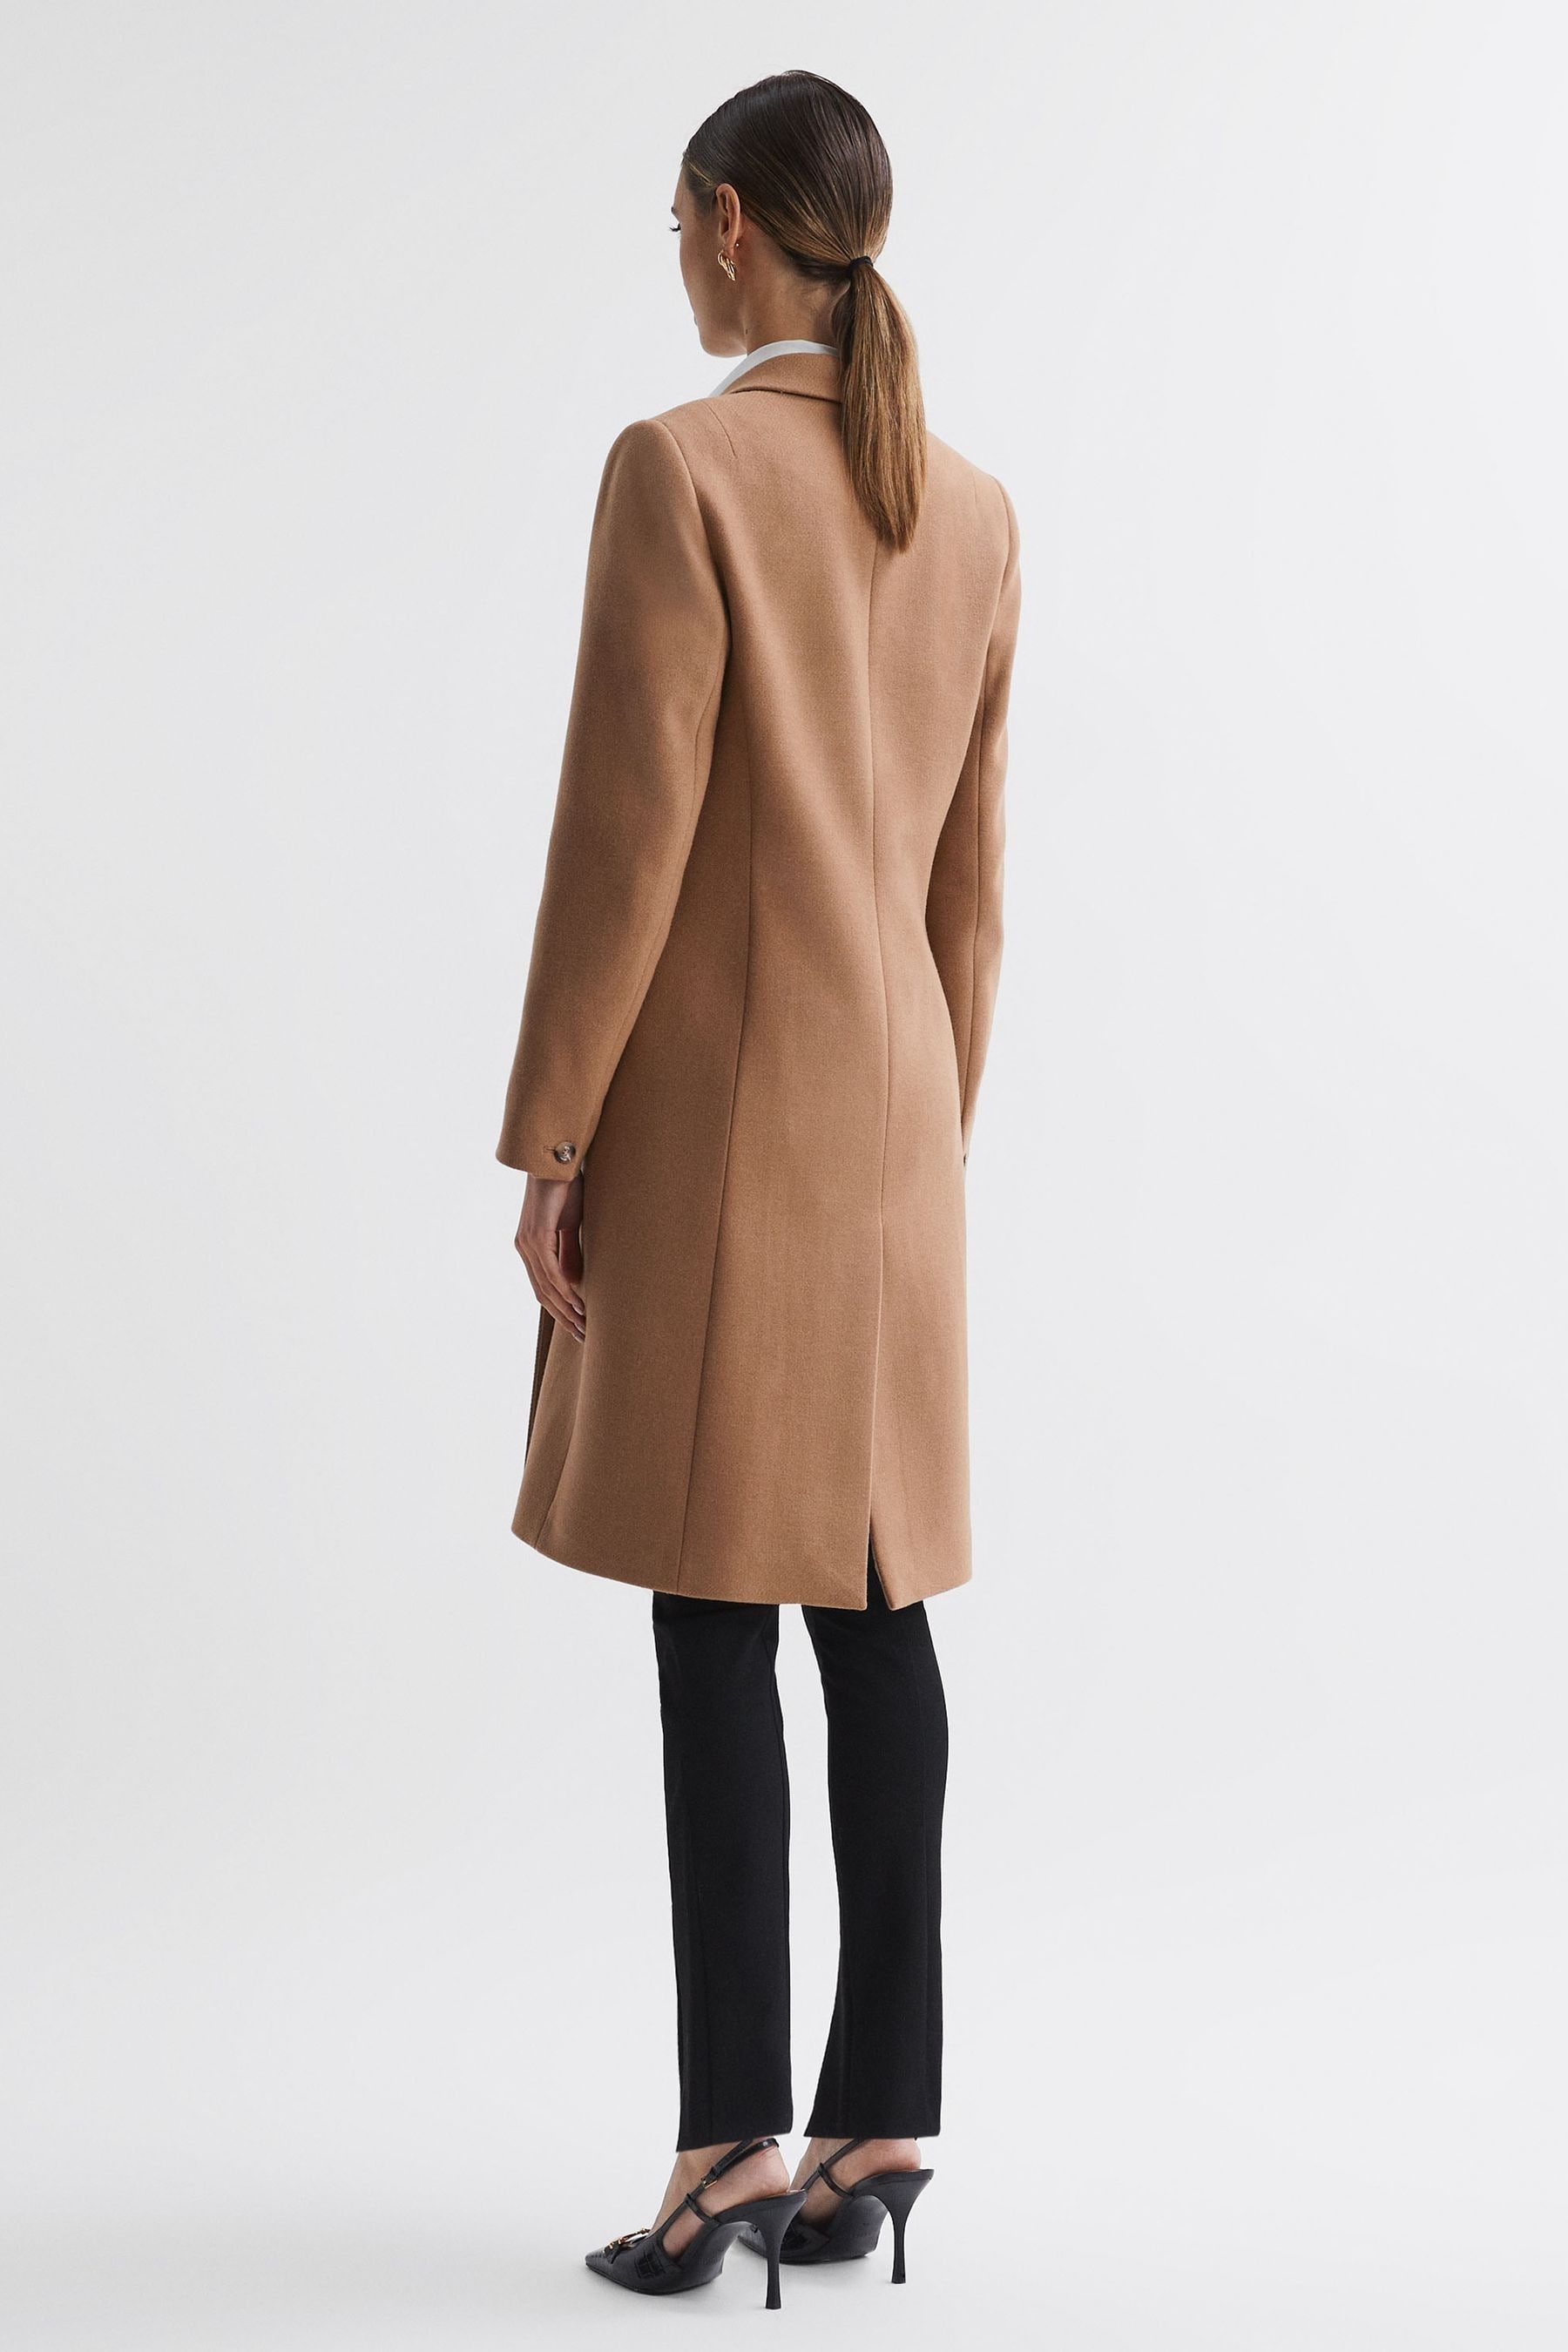 Buy Reiss Arlow Wool Blend Double Breasted Coat from the Next UK online ...